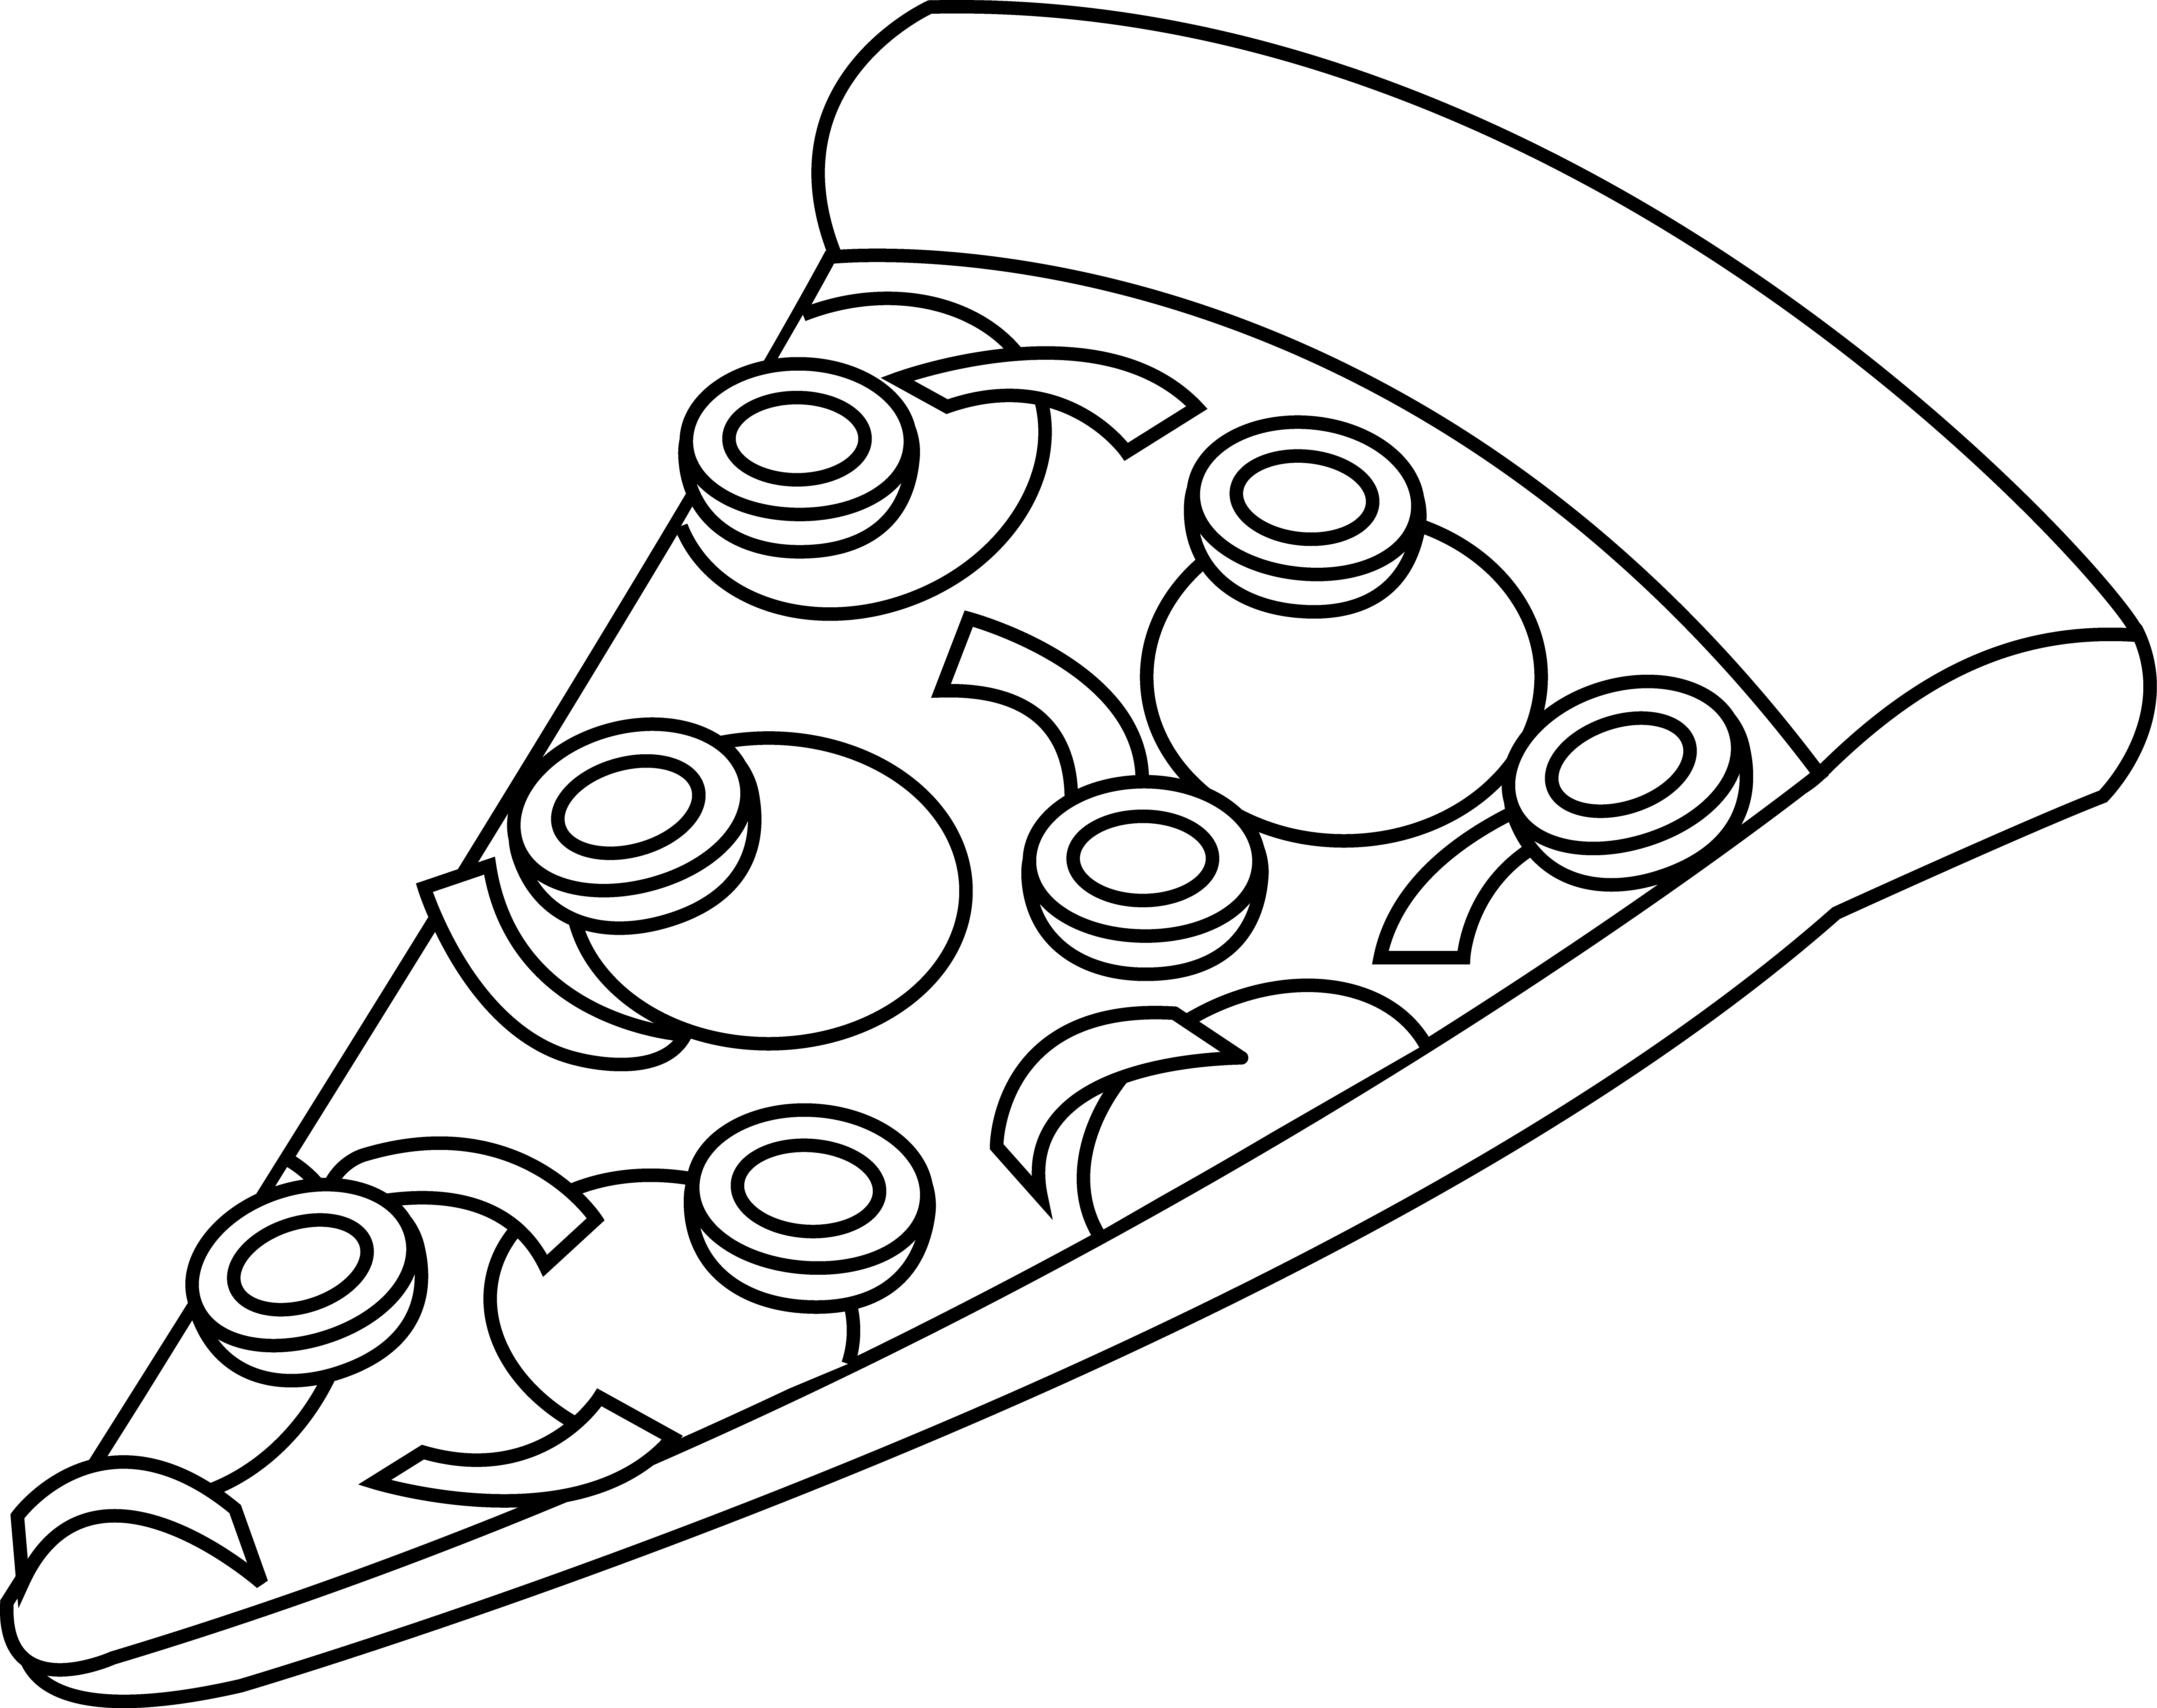 Pizza Slice   Clipart Panda   Free Clipart Images